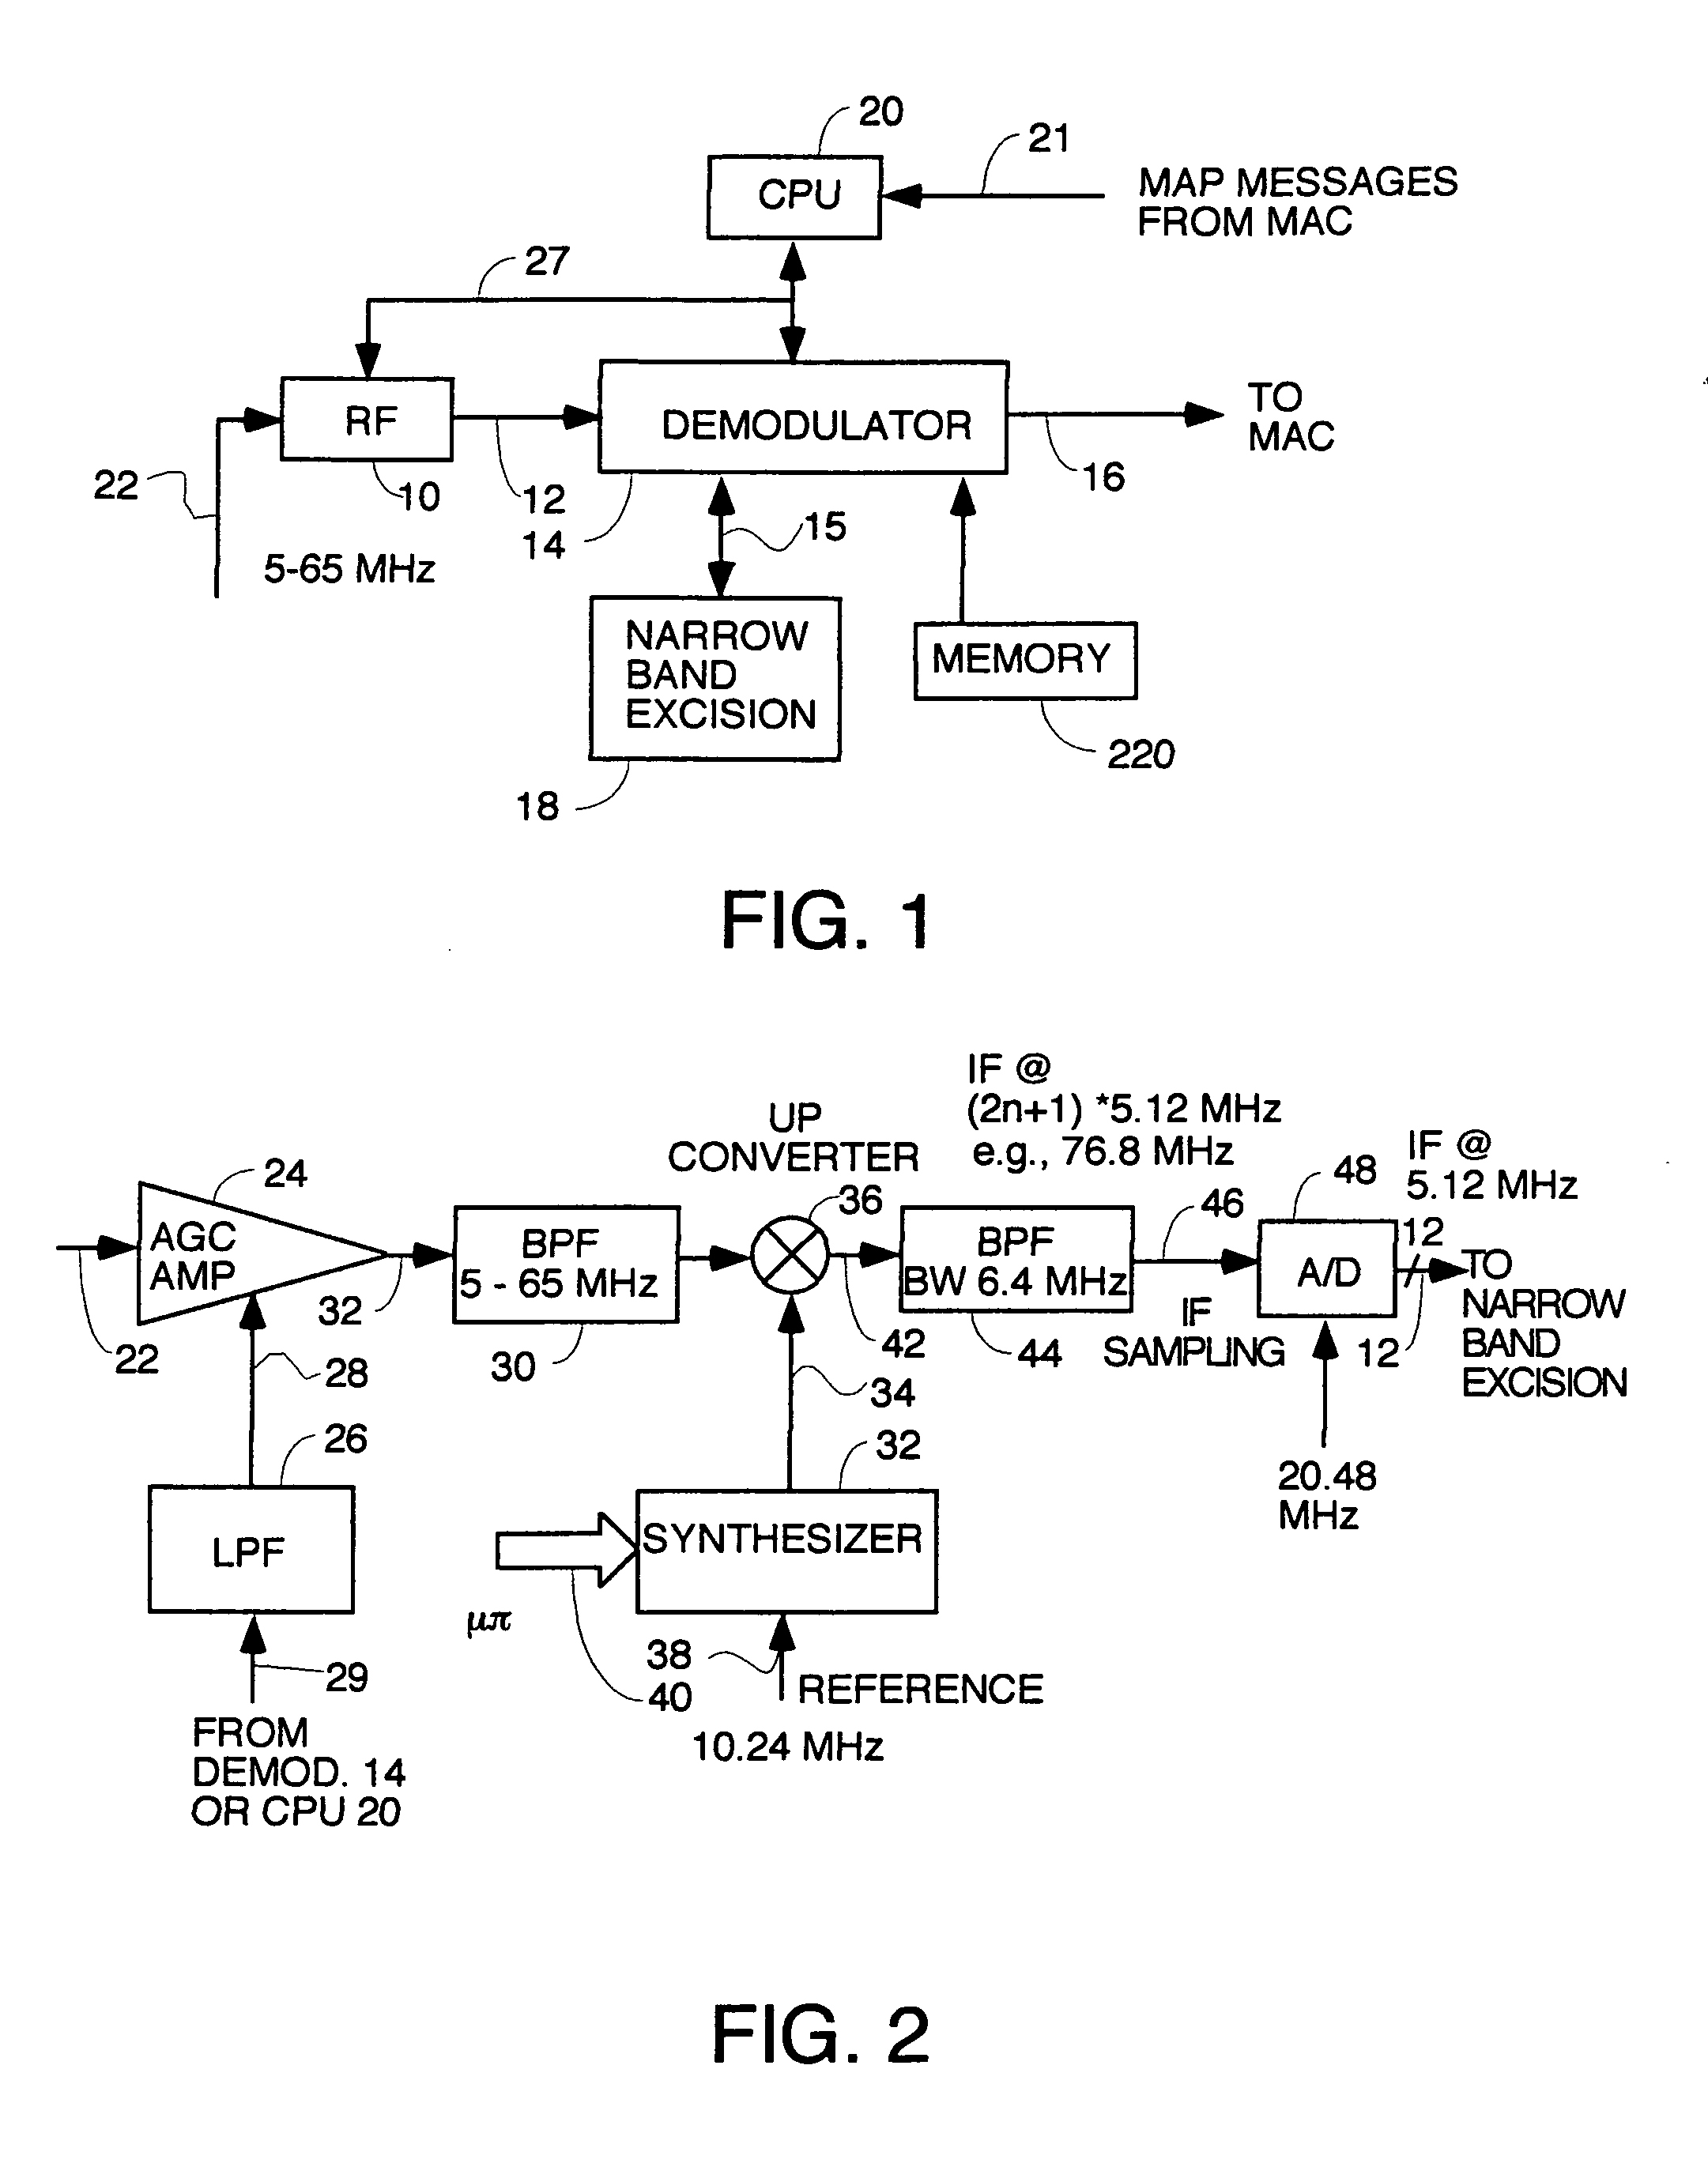 Head end receiver for digital data delivery systems using mixed mode SCDMA and TDMA multiplexing